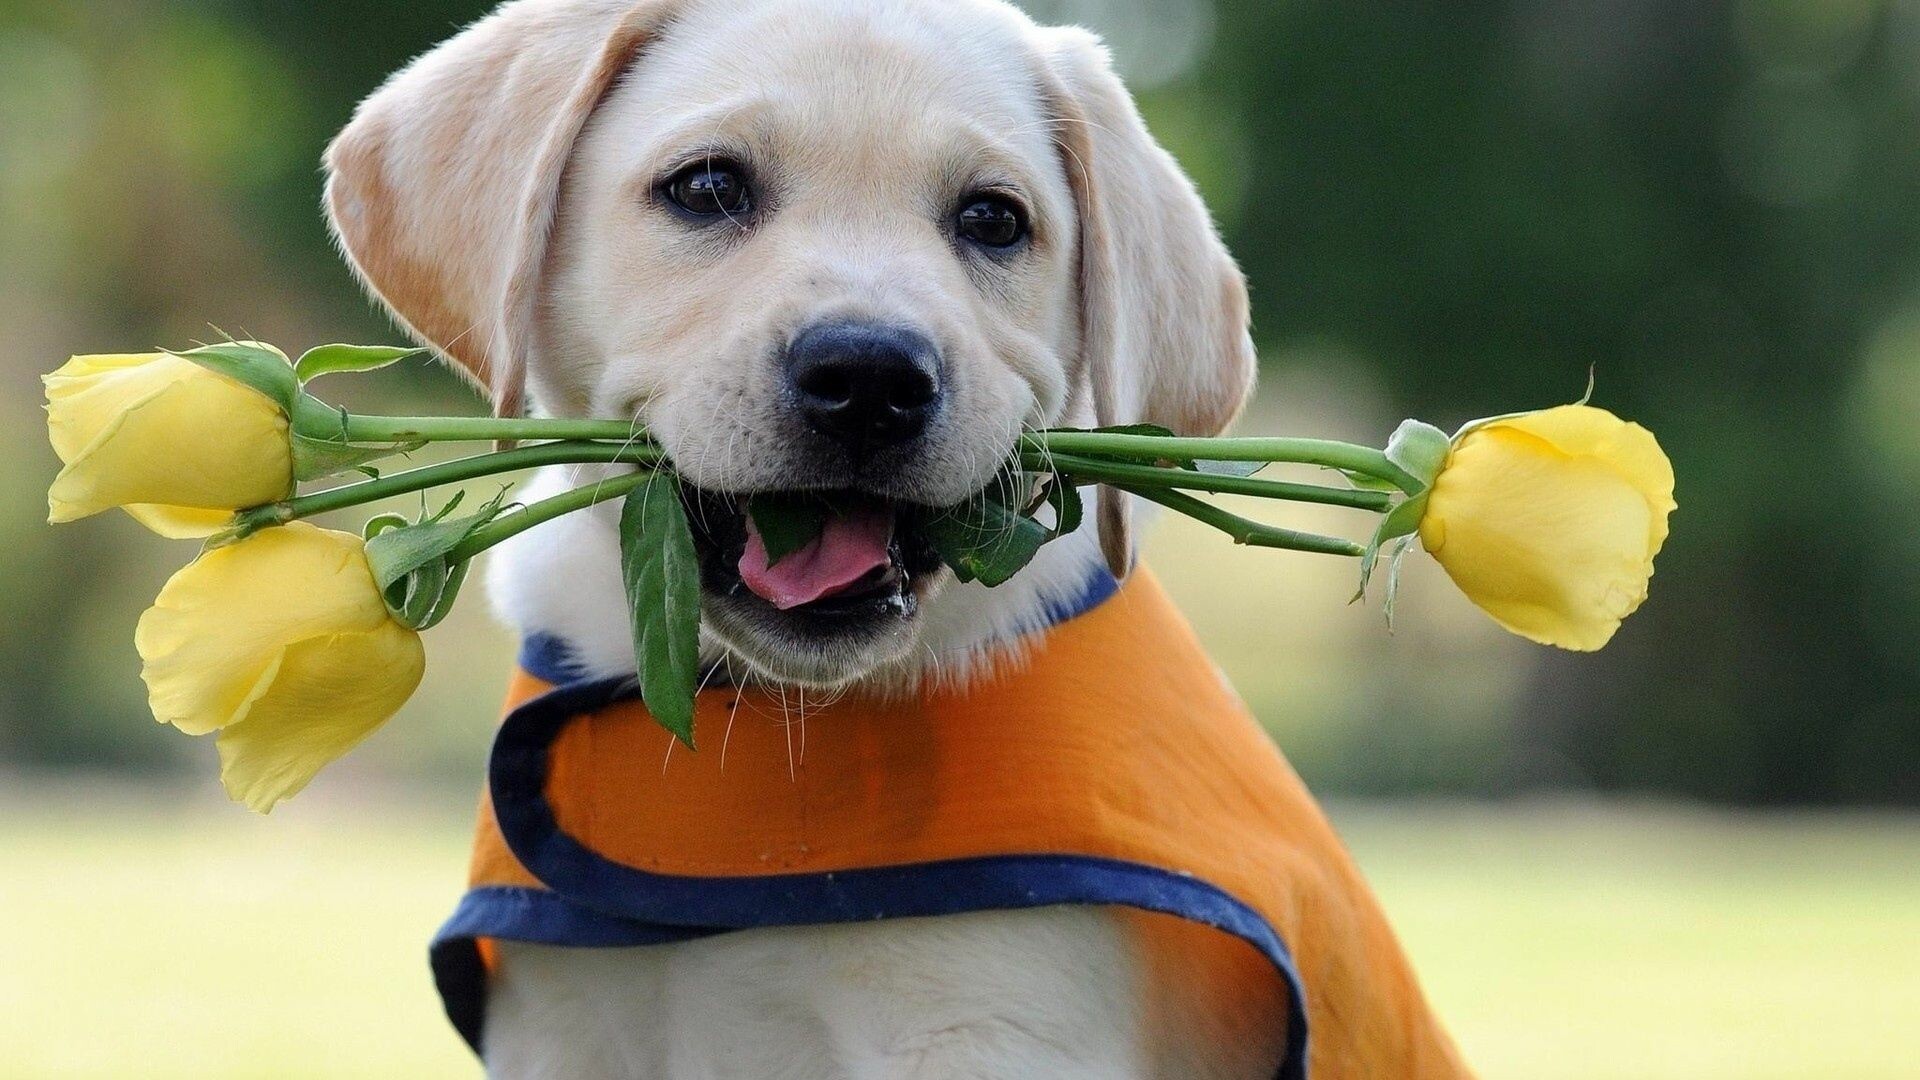 Labrador Retriever: Cute animals, Puppies, The most commonly used breed for guide dogs. 1920x1080 Full HD Wallpaper.